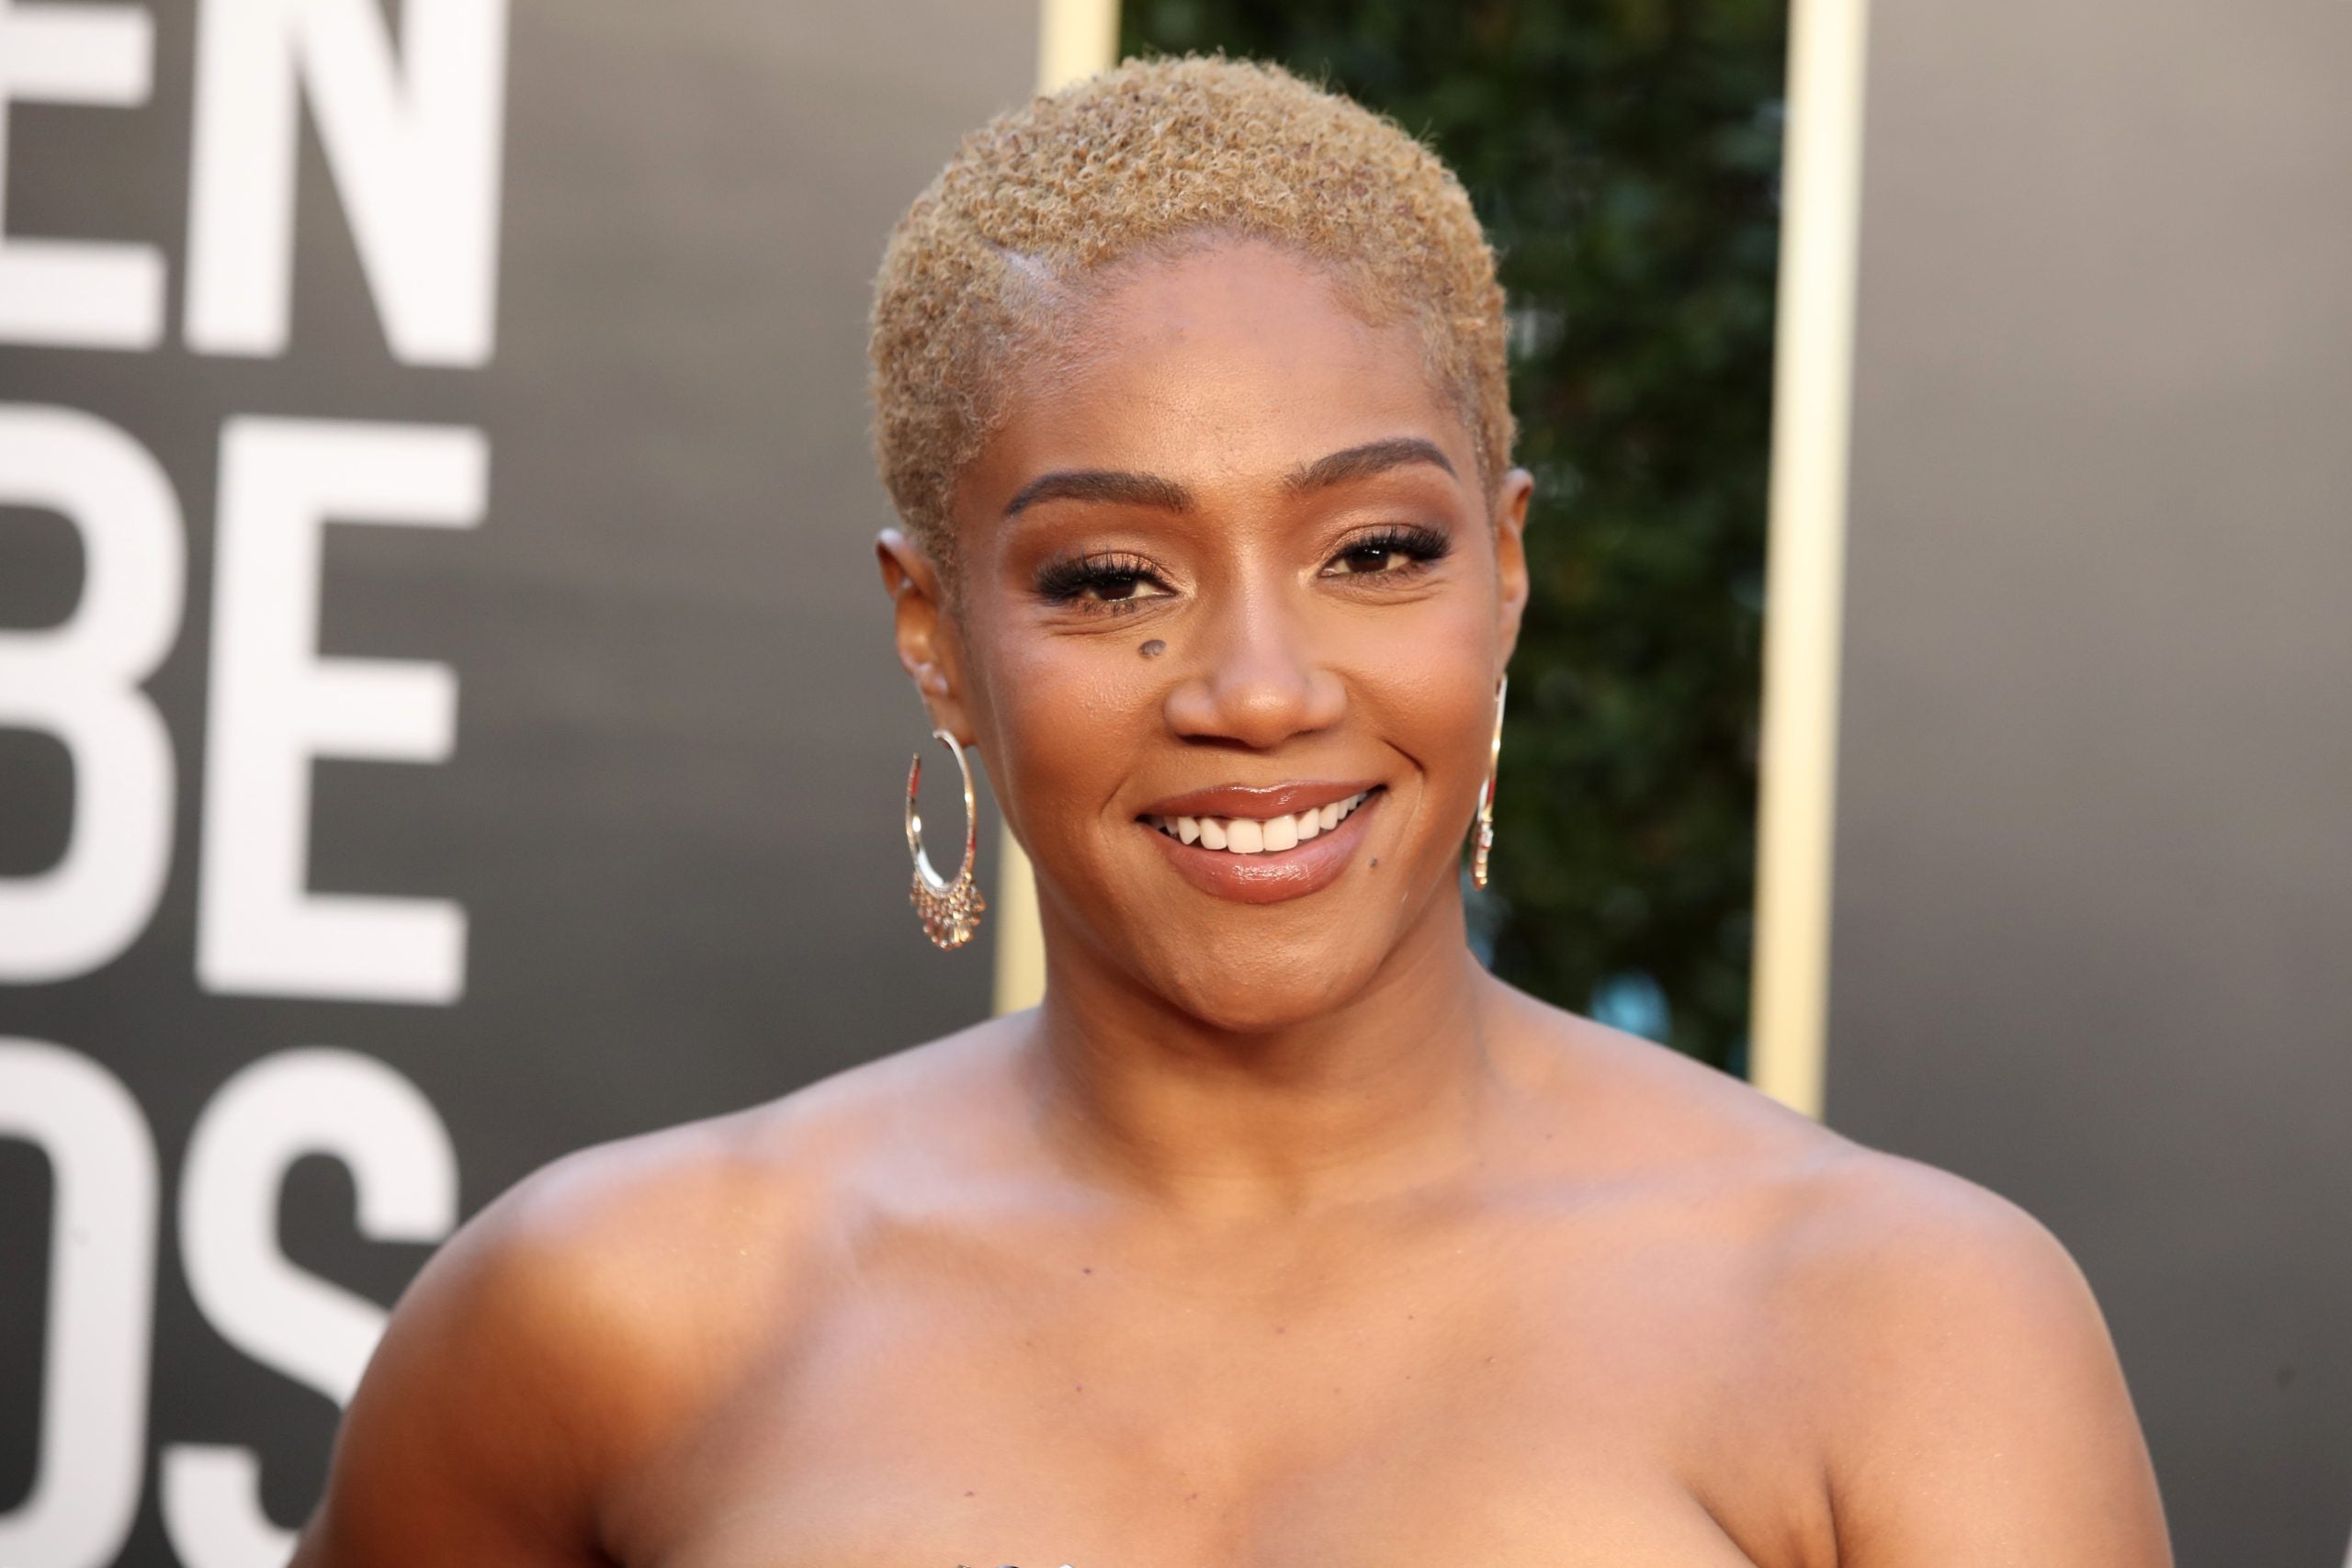 Tiffany Haddish On The 'Full-Blown Breakdown' That Changed The Way She Cares For Her Mental Health